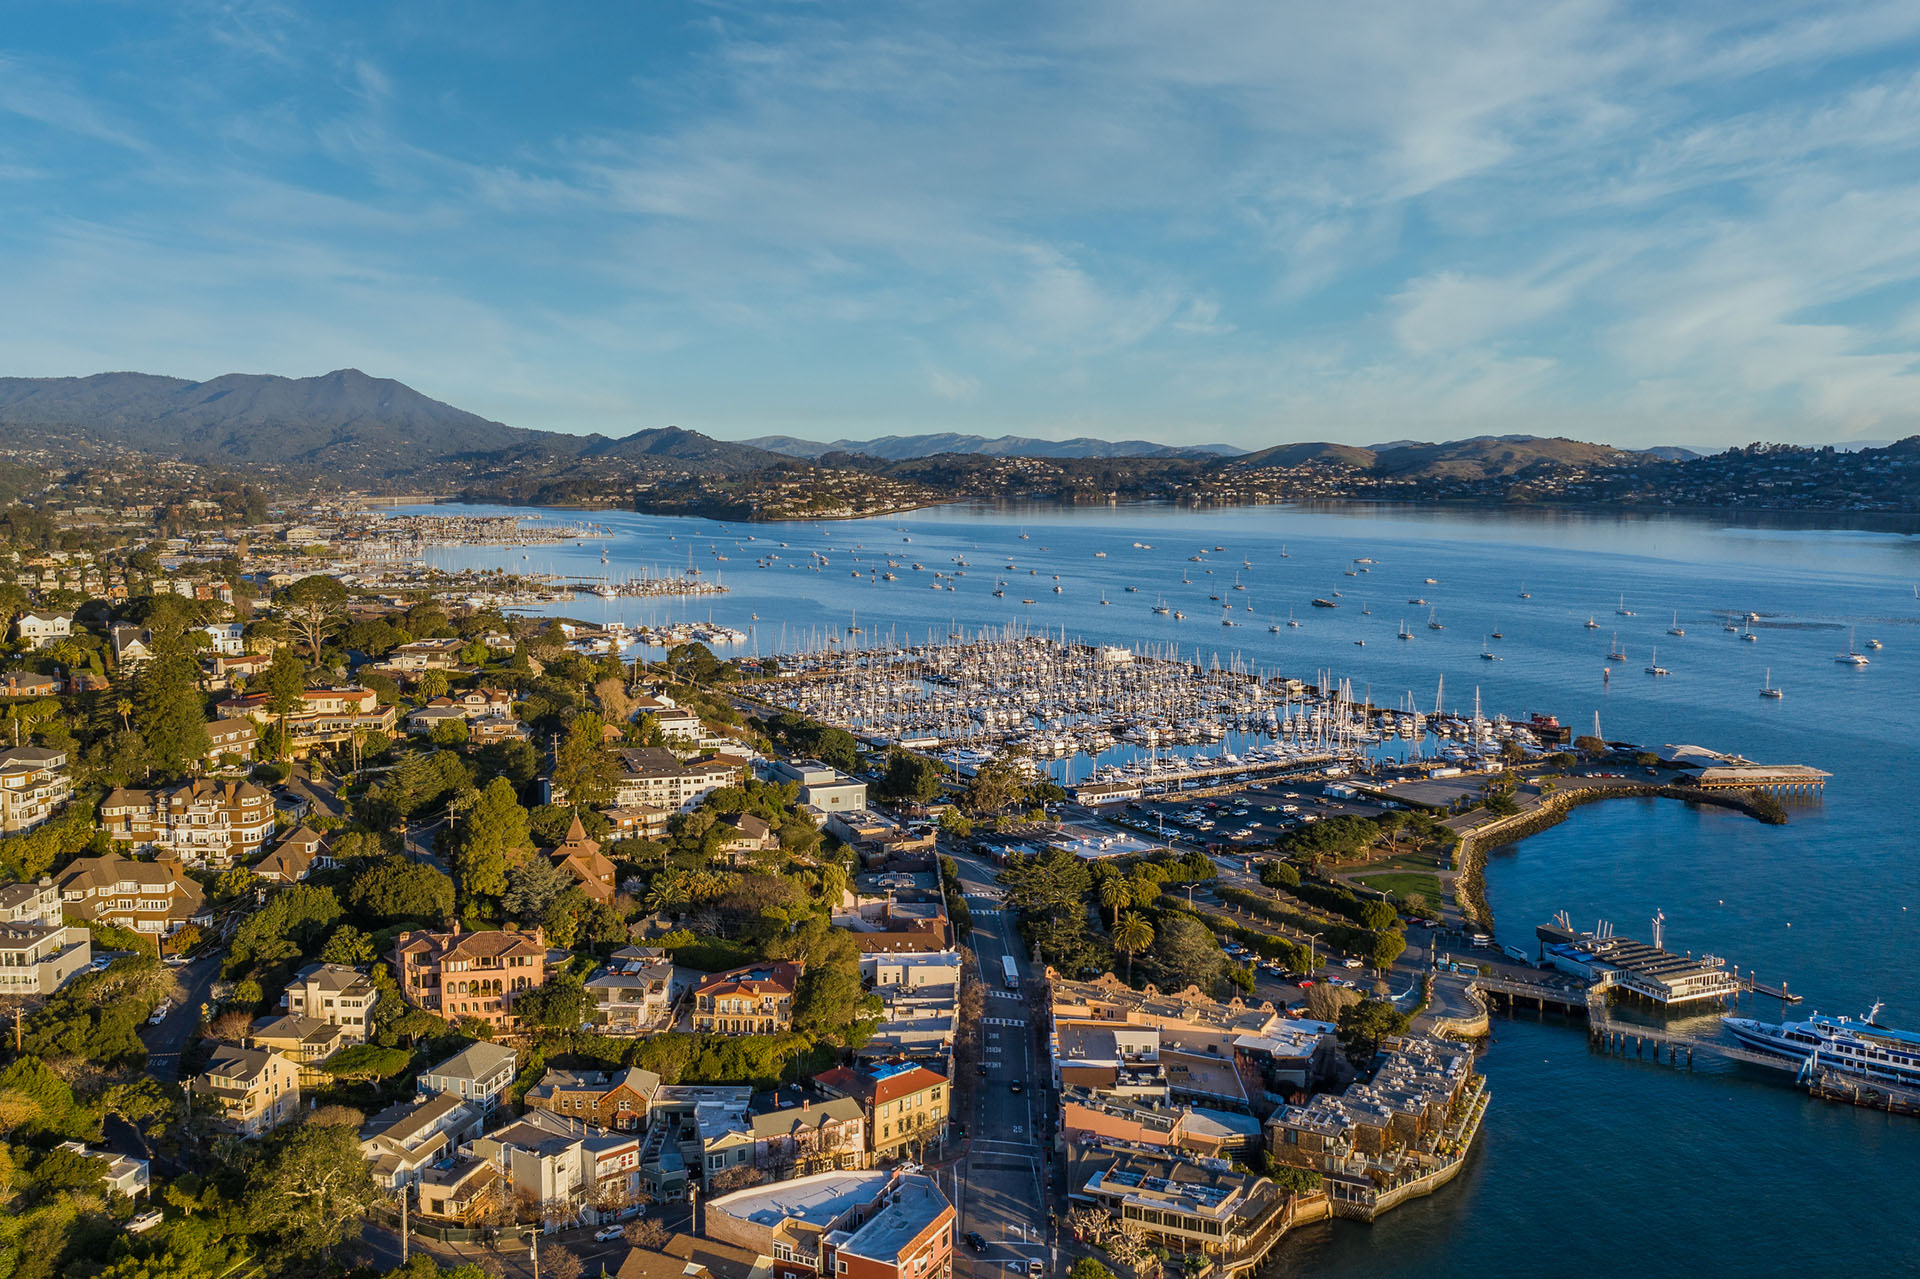 An aerial view of Sausalito with the marina and bay